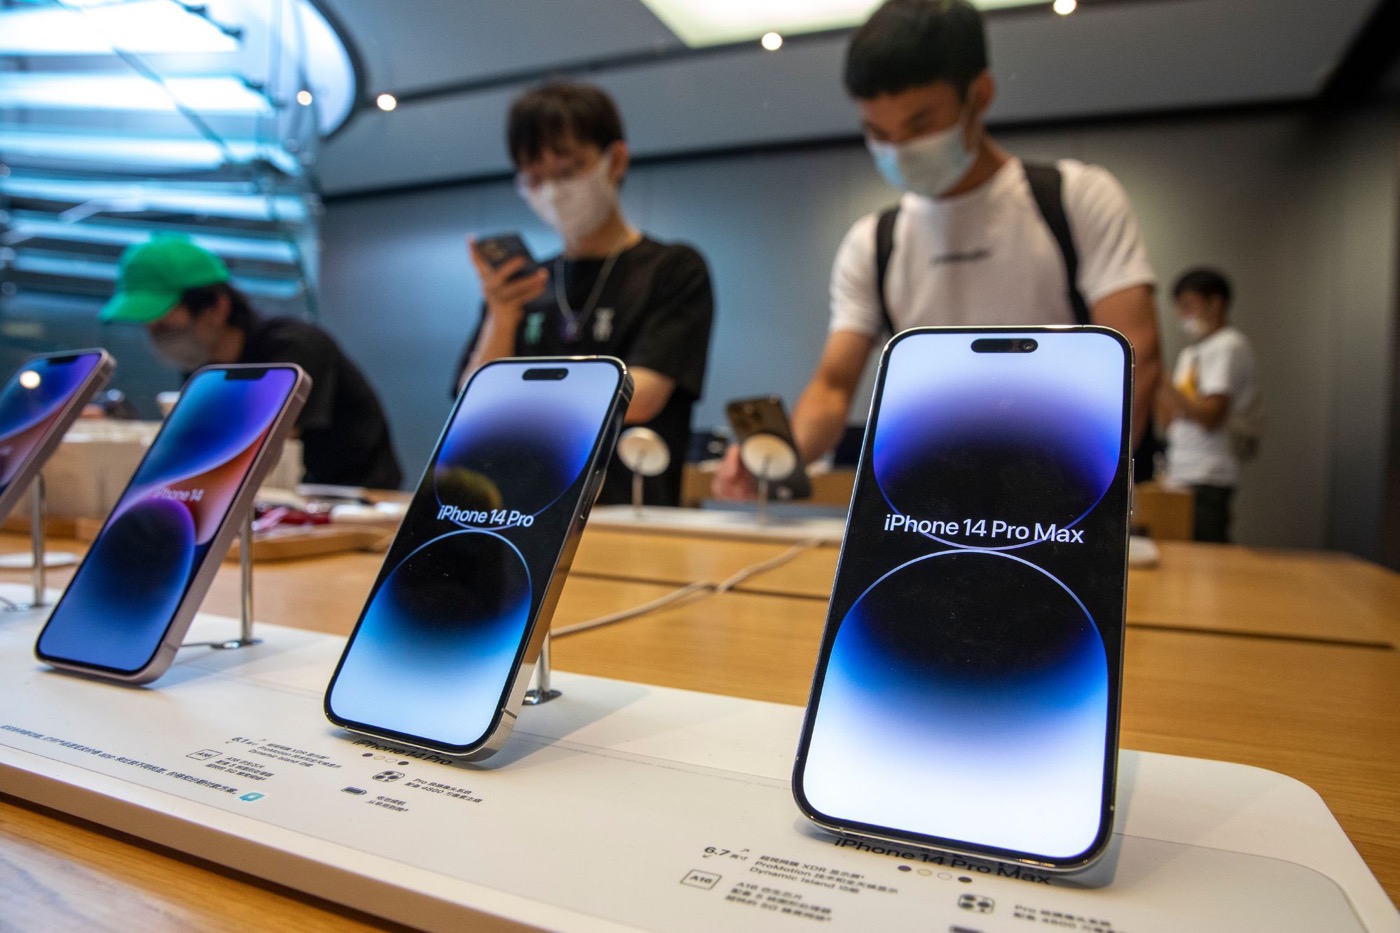 Apple wants to produce outside of China and depend less on Foxconn